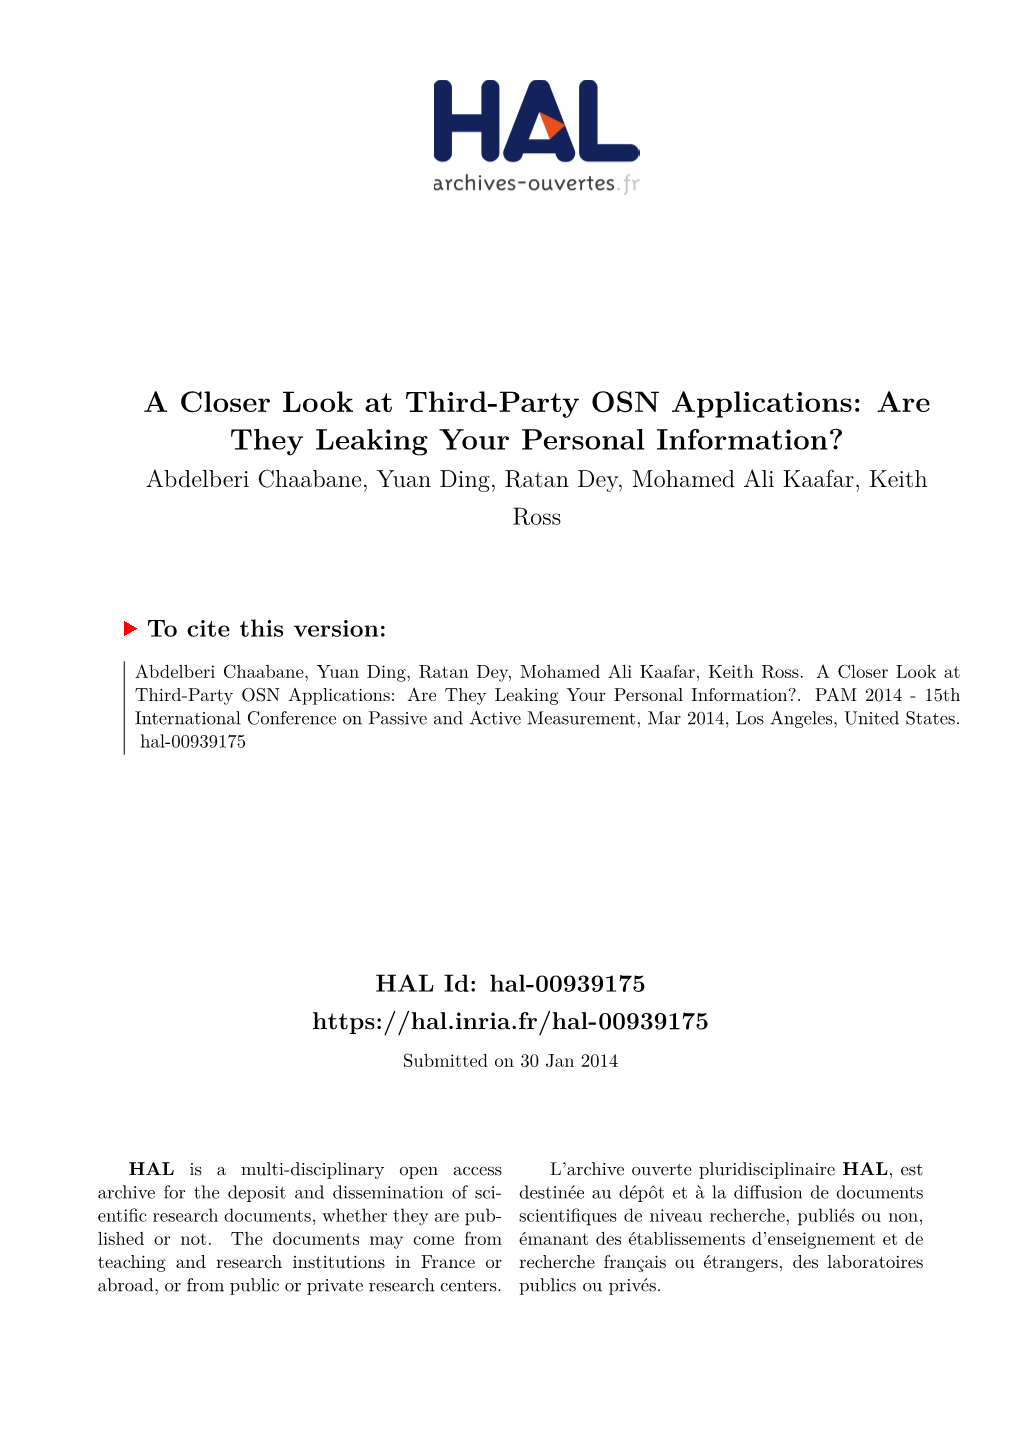 A Closer Look at Third-Party OSN Applications: Are They Leaking Your Personal Information? Abdelberi Chaabane, Yuan Ding, Ratan Dey, Mohamed Ali Kaafar, Keith Ross